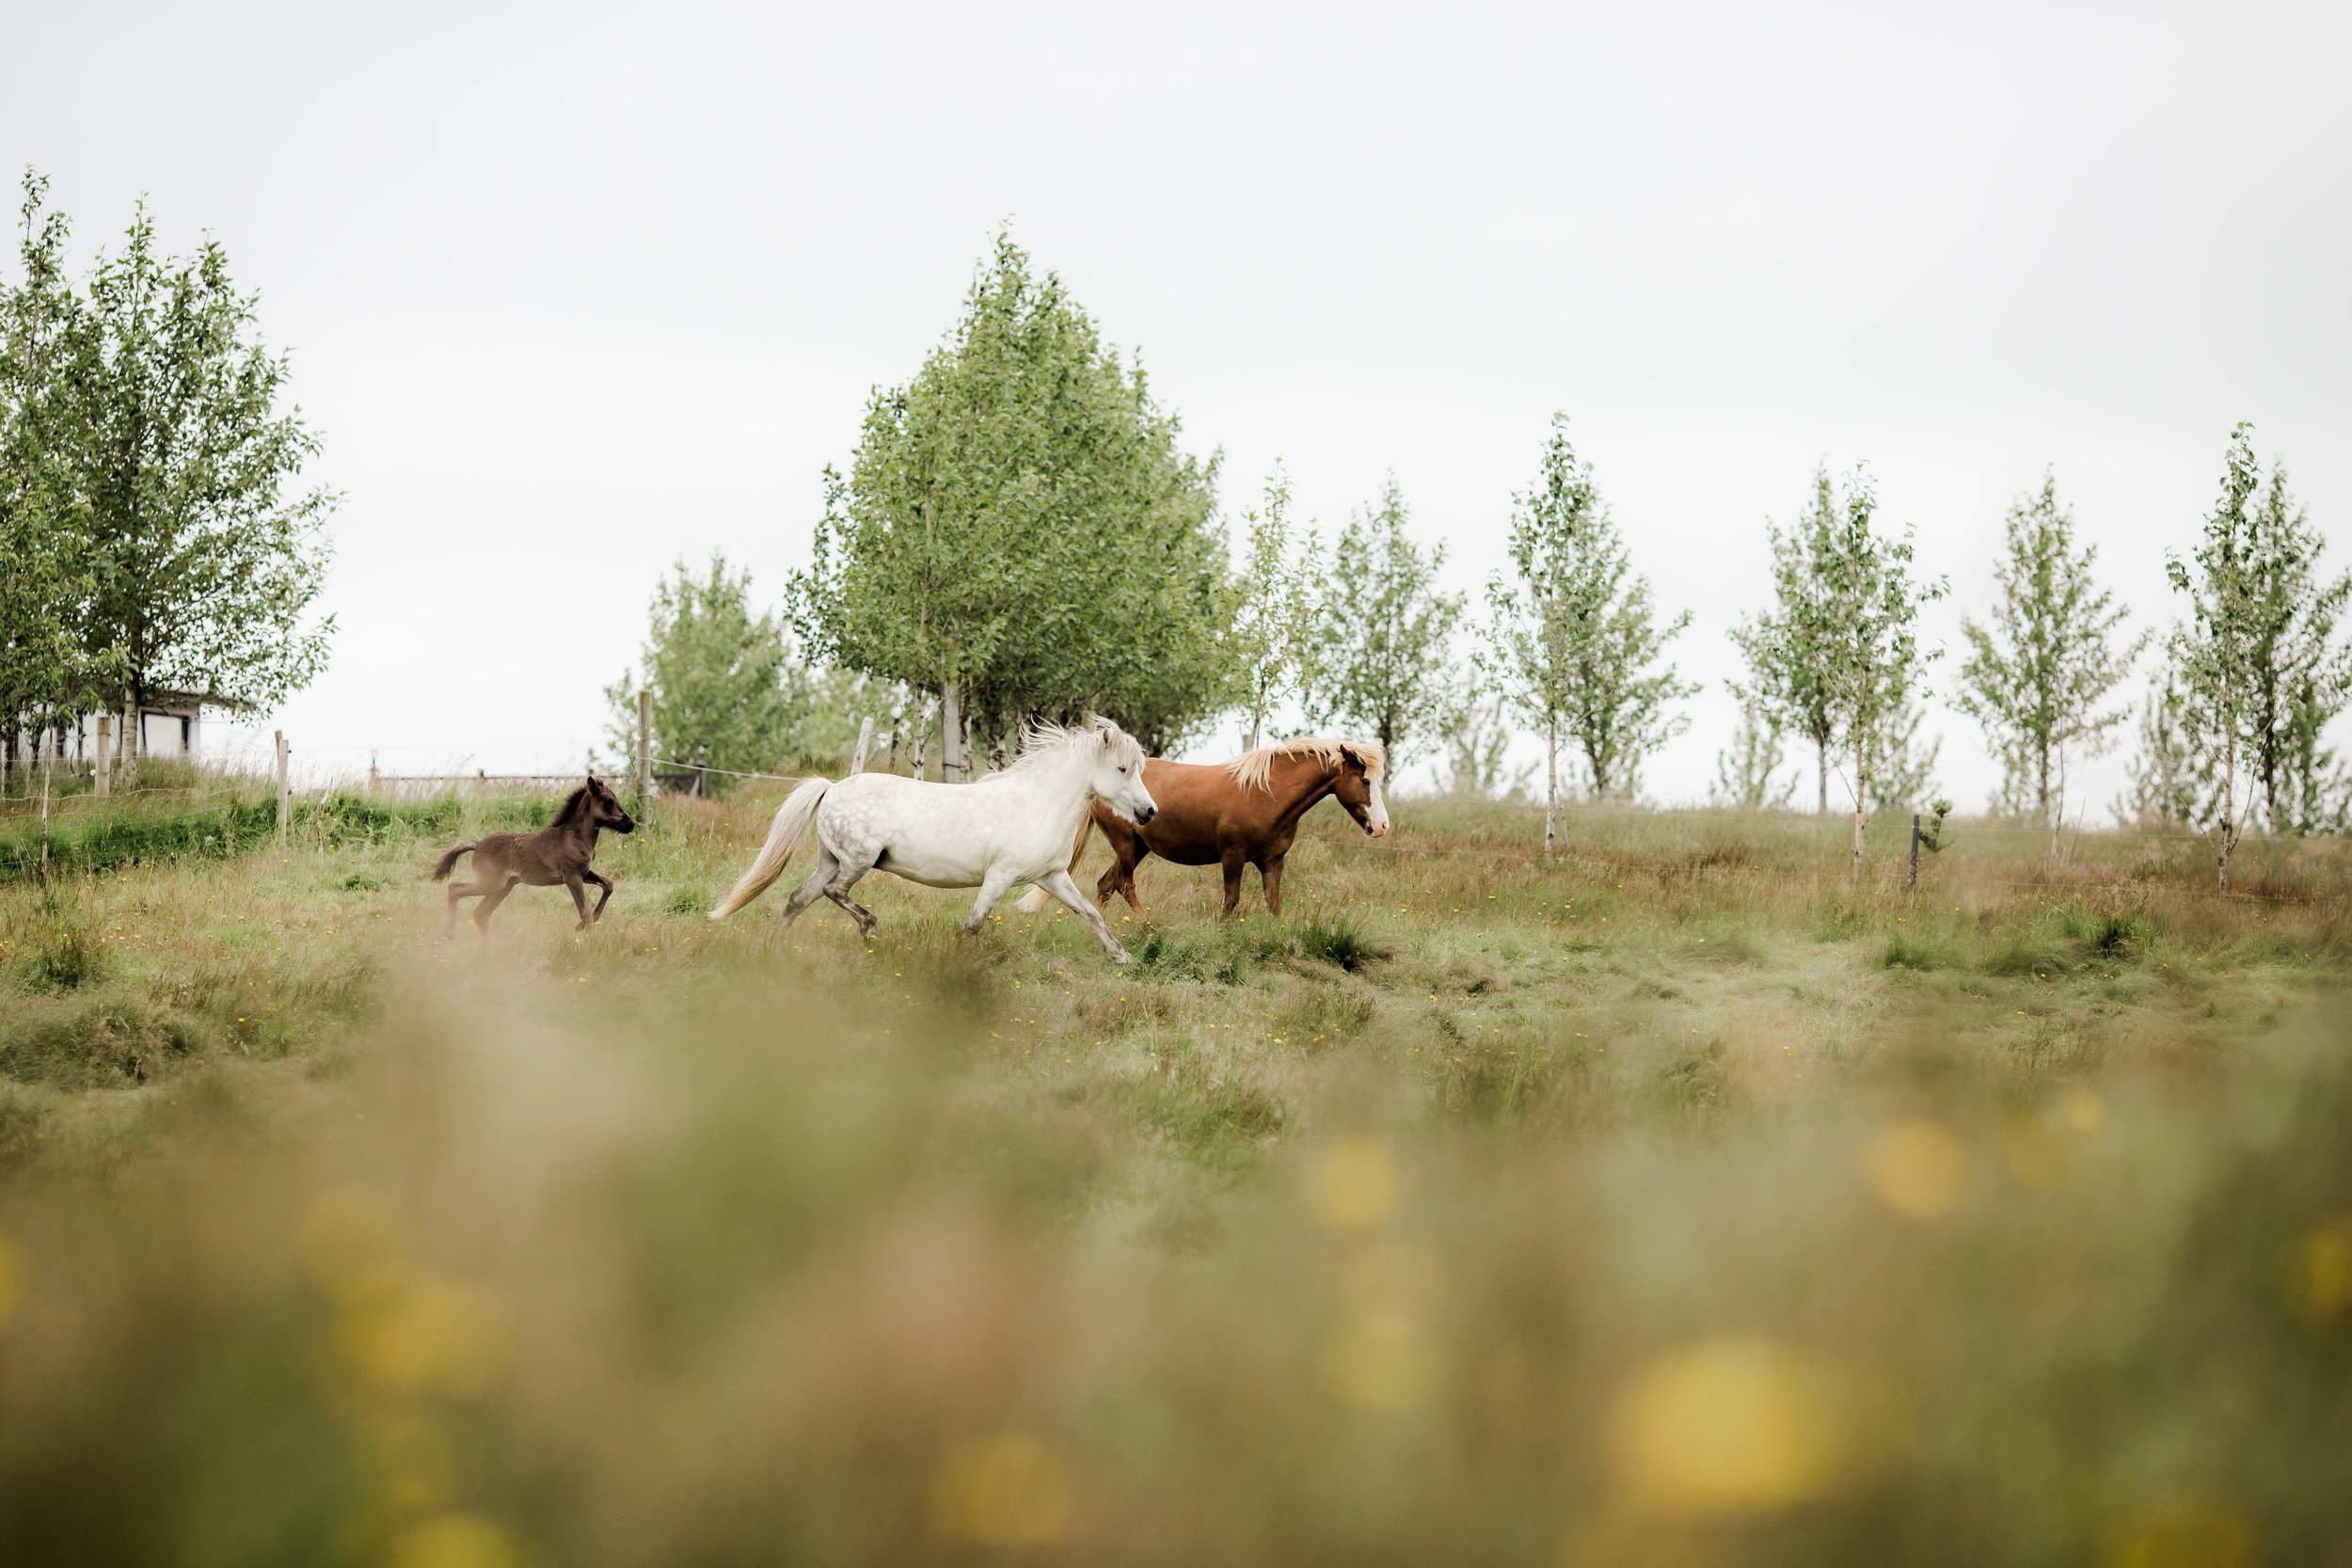 Horses in Iceland by Christina Swanson now on Cottage Hill48.jpg